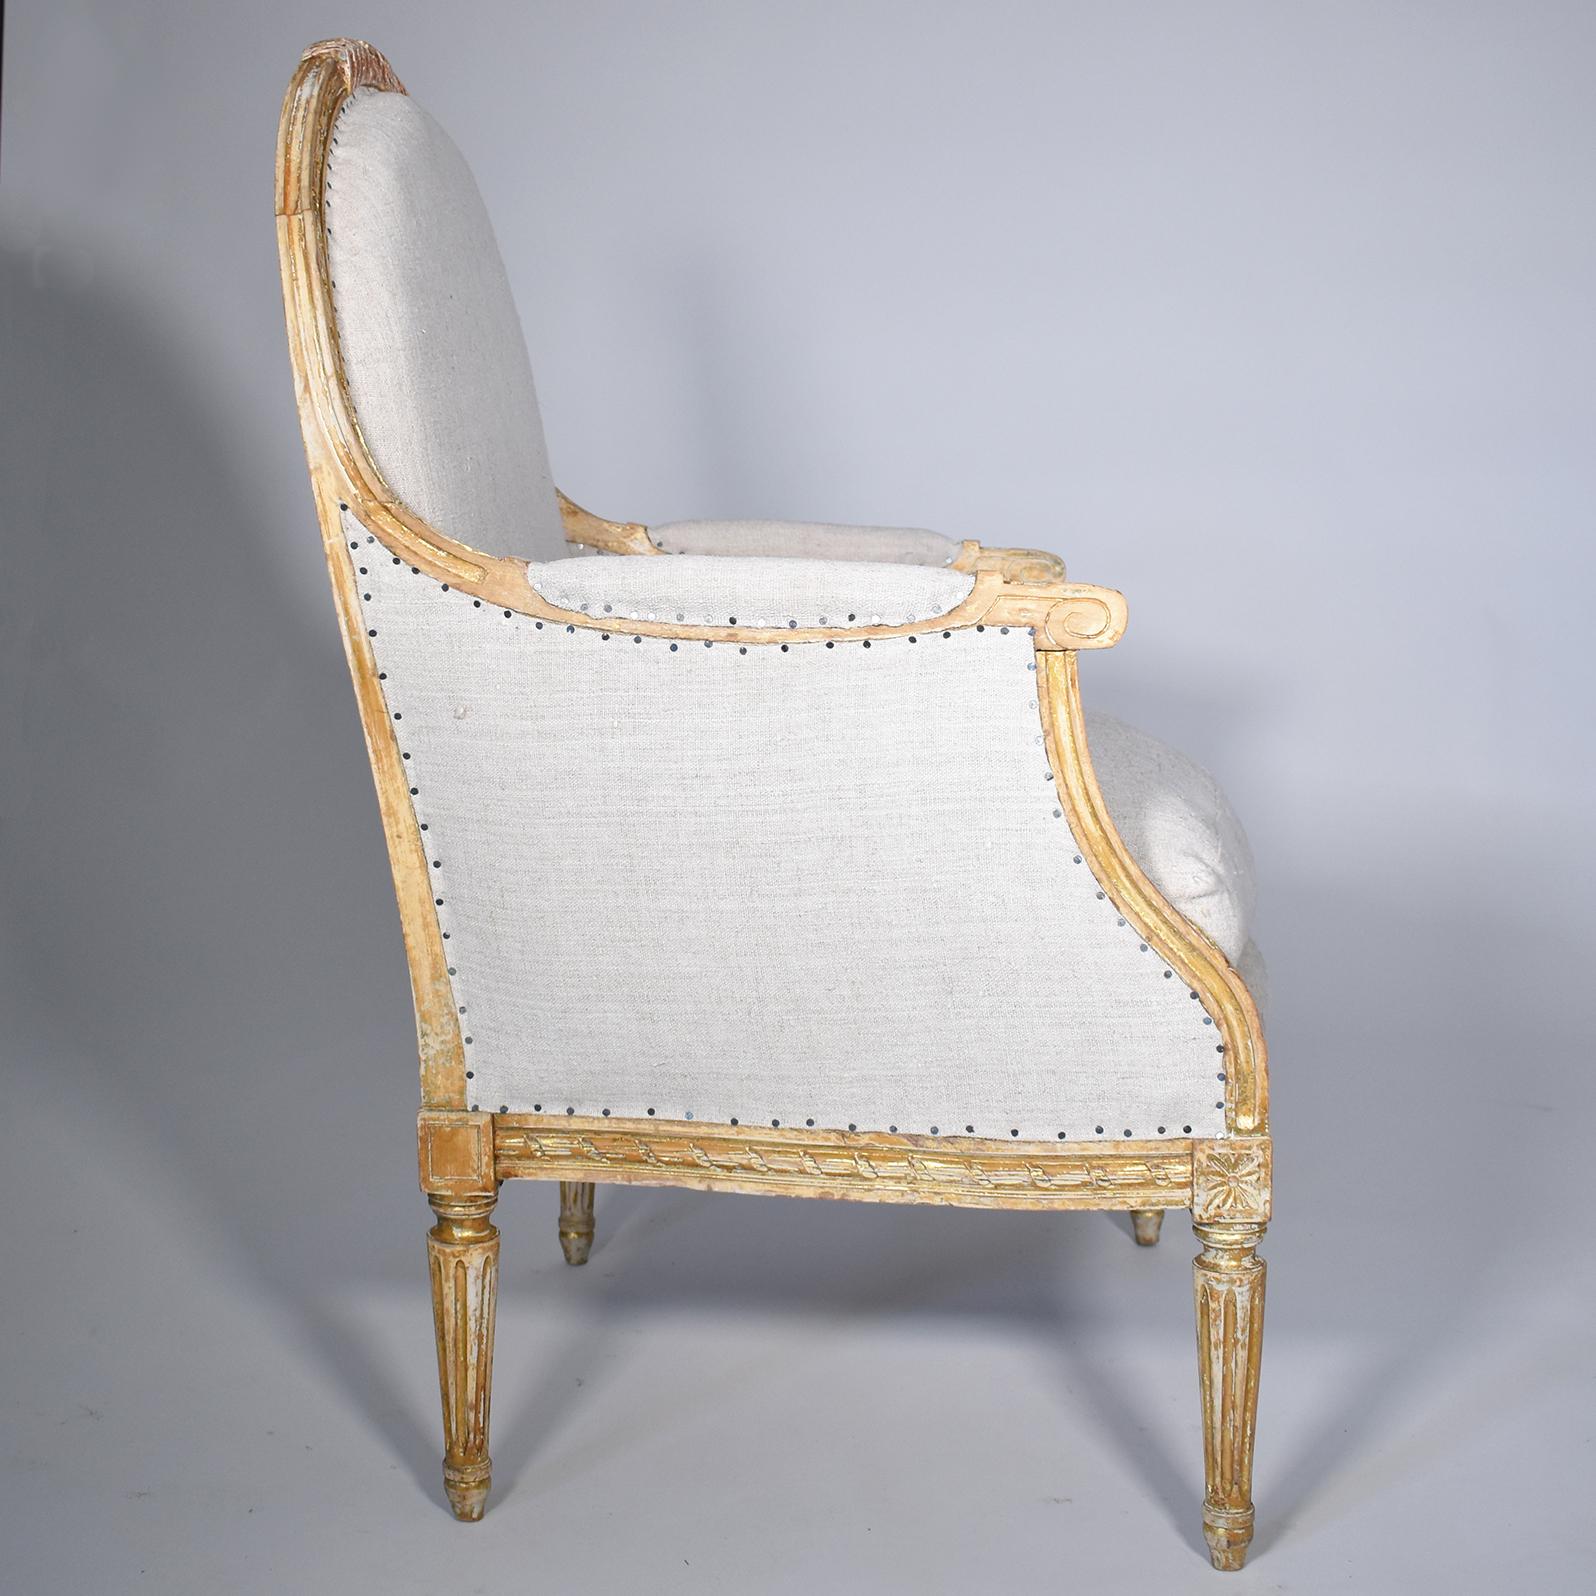 Hand-Carved 19th Century French Louis XVI Gilded Armchair, Origin France